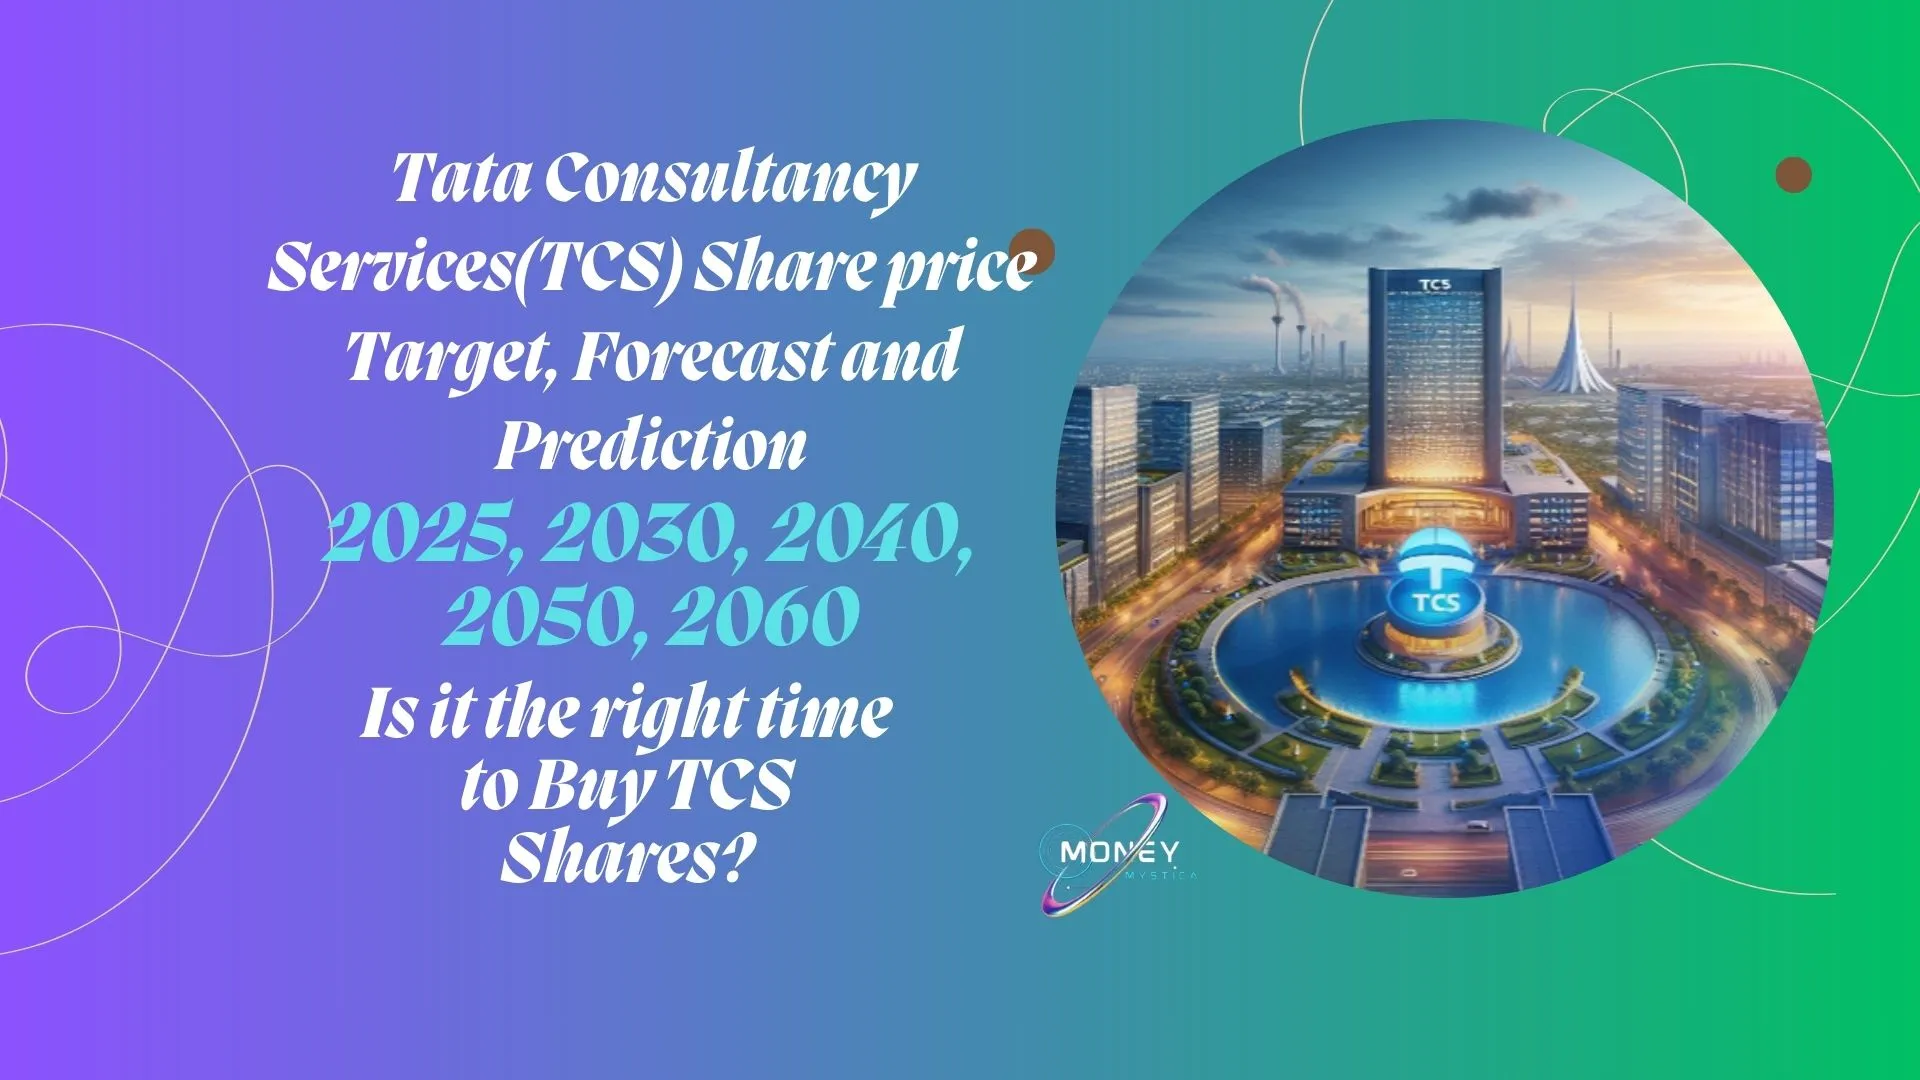 tata consultancy services limited (TCS) share price target